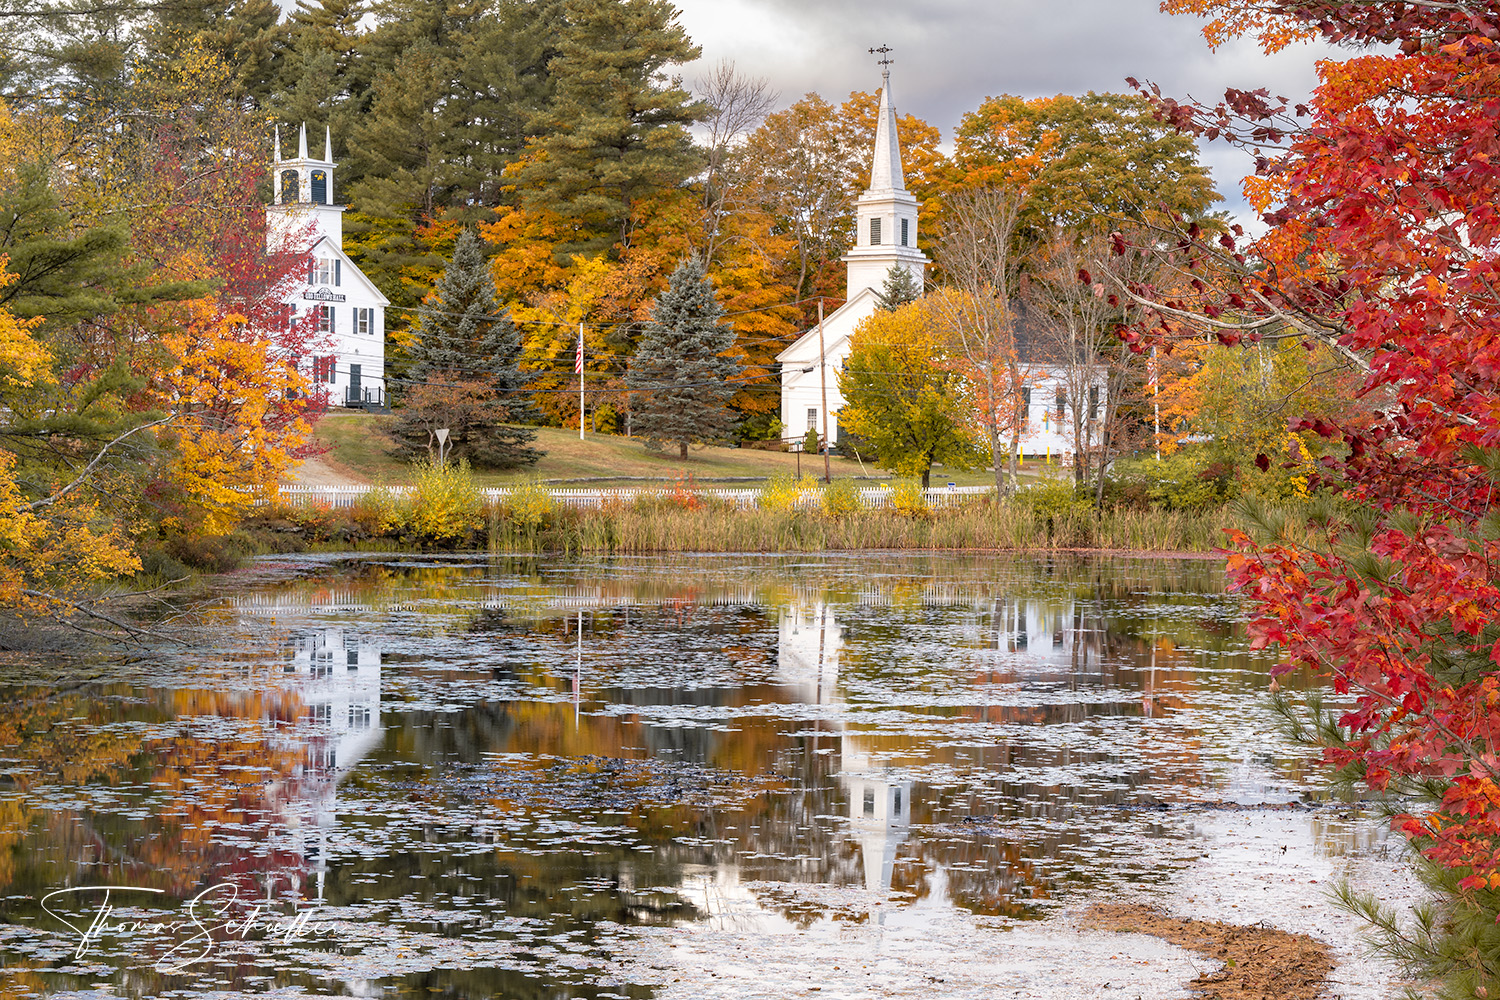 Marlow New Hampshire Reflections From Lily Pond | The Prototype of a Traditional Rural Yankee New England Village